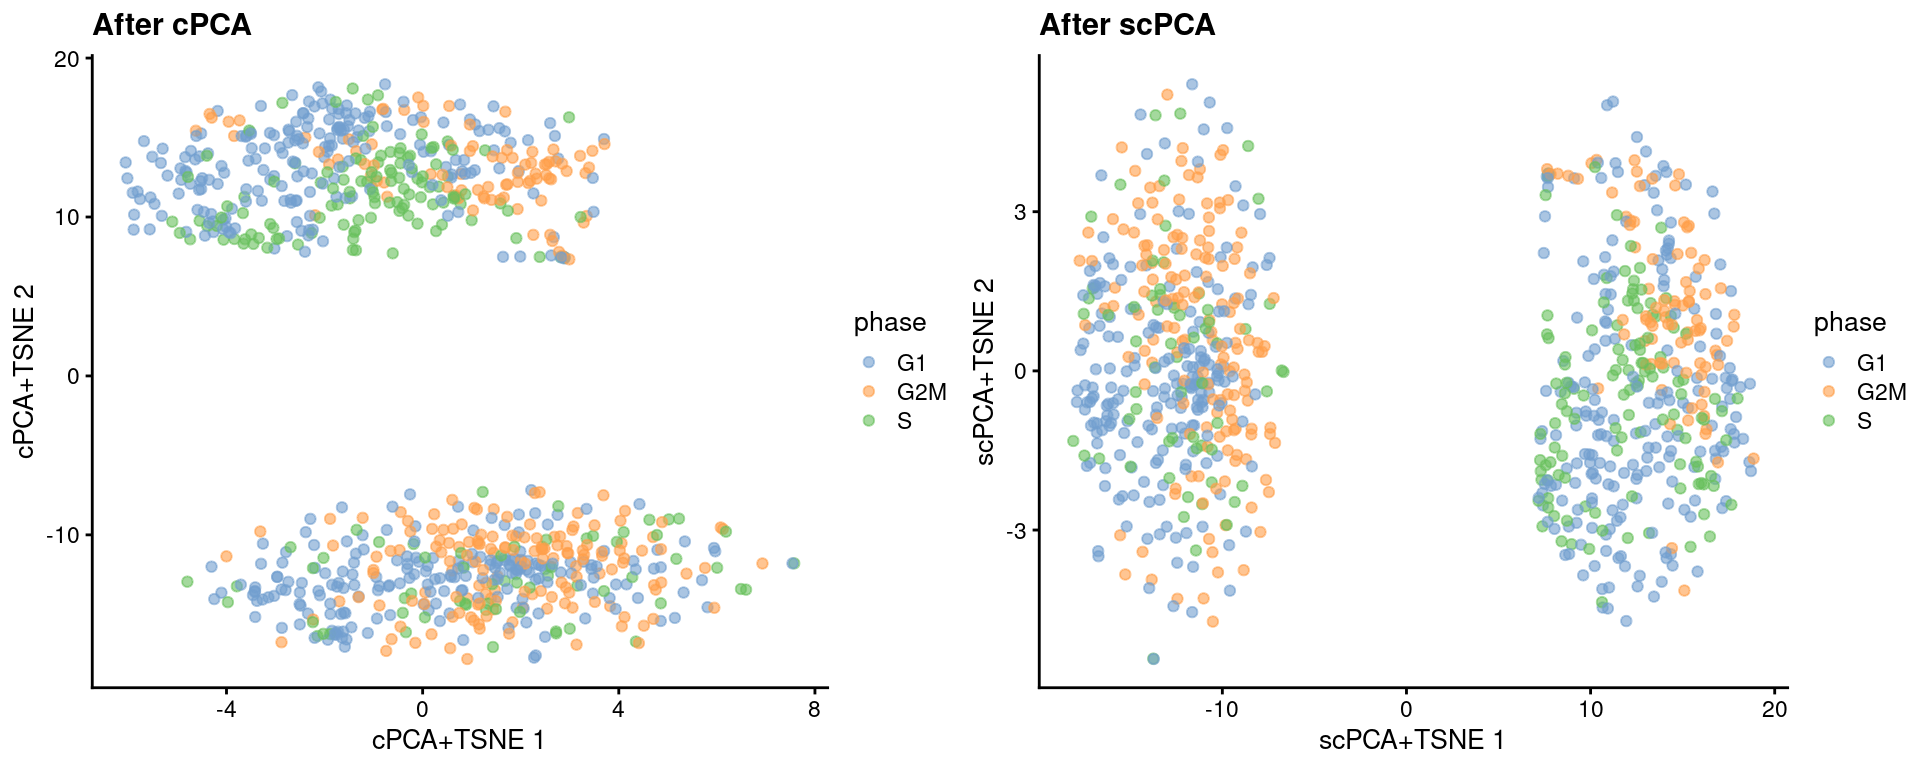 More $t$-SNE plots of the Messmer hESC dataset after cPCA and scPCA, where each point is a cell and is colored by its assigned cell cycle phase.